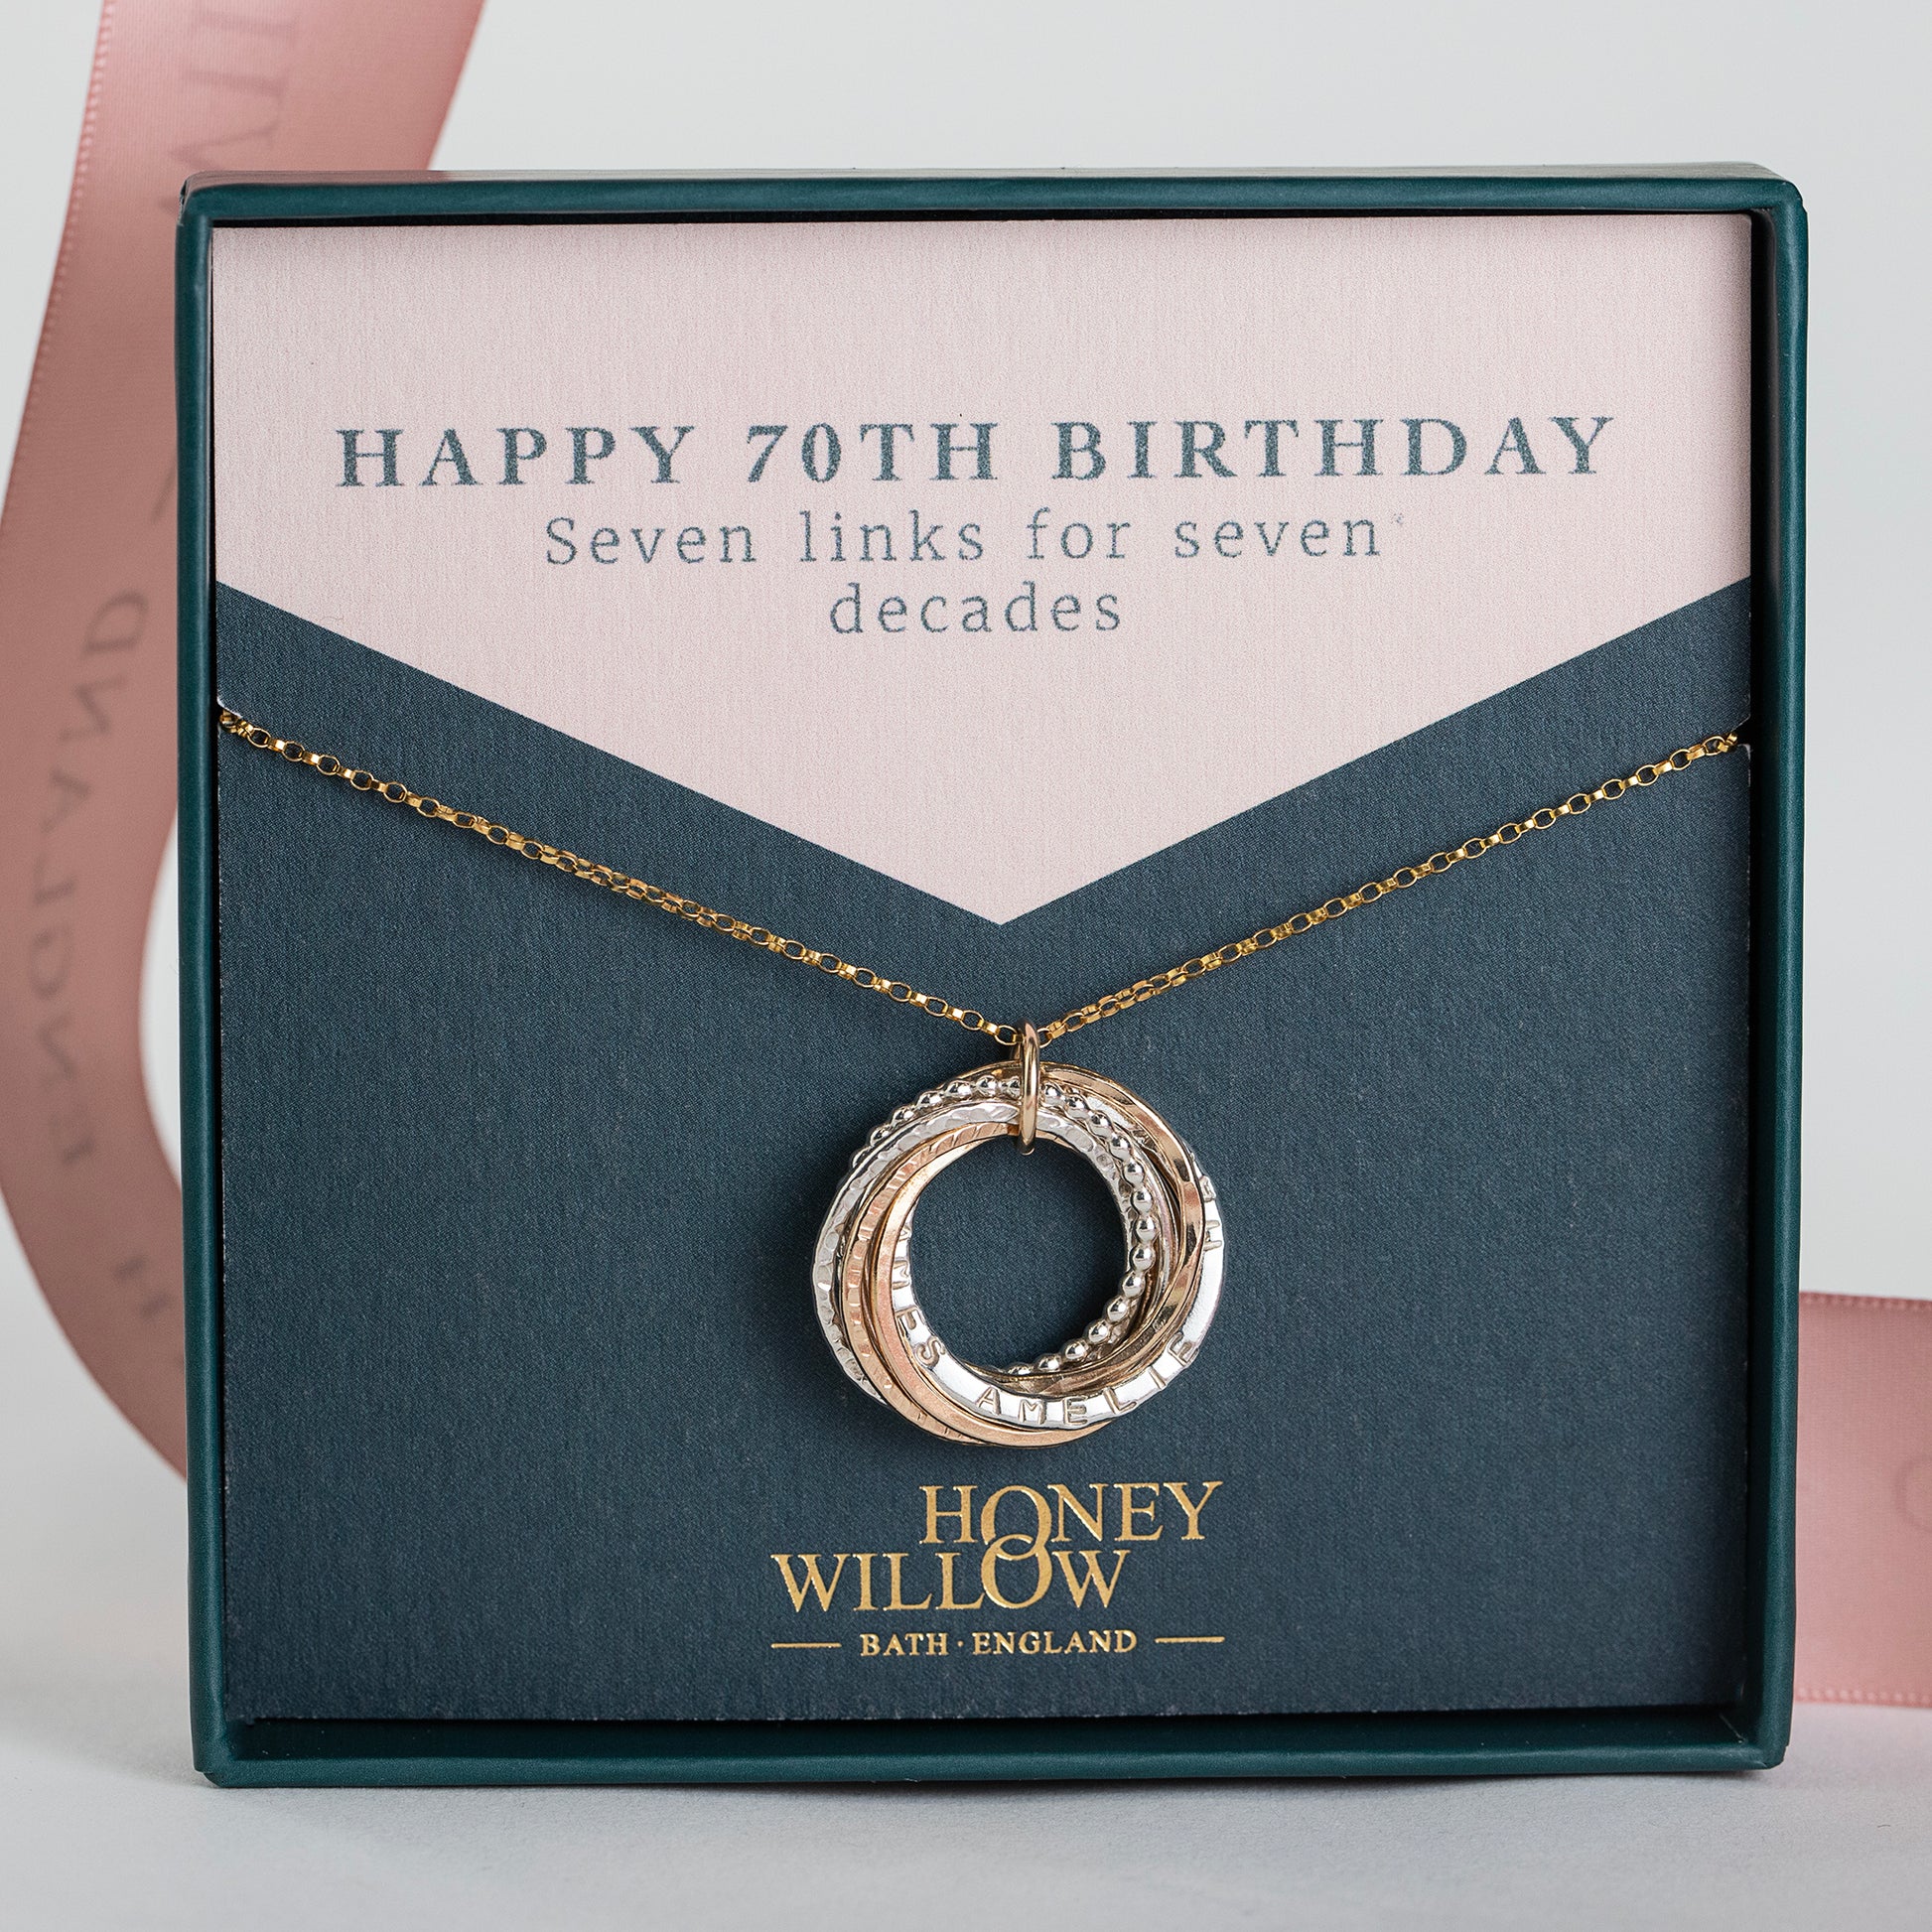 Personalised 70th Birthday Necklace - The Original 7 Links for 7 Decades Necklace - Silver & Gold